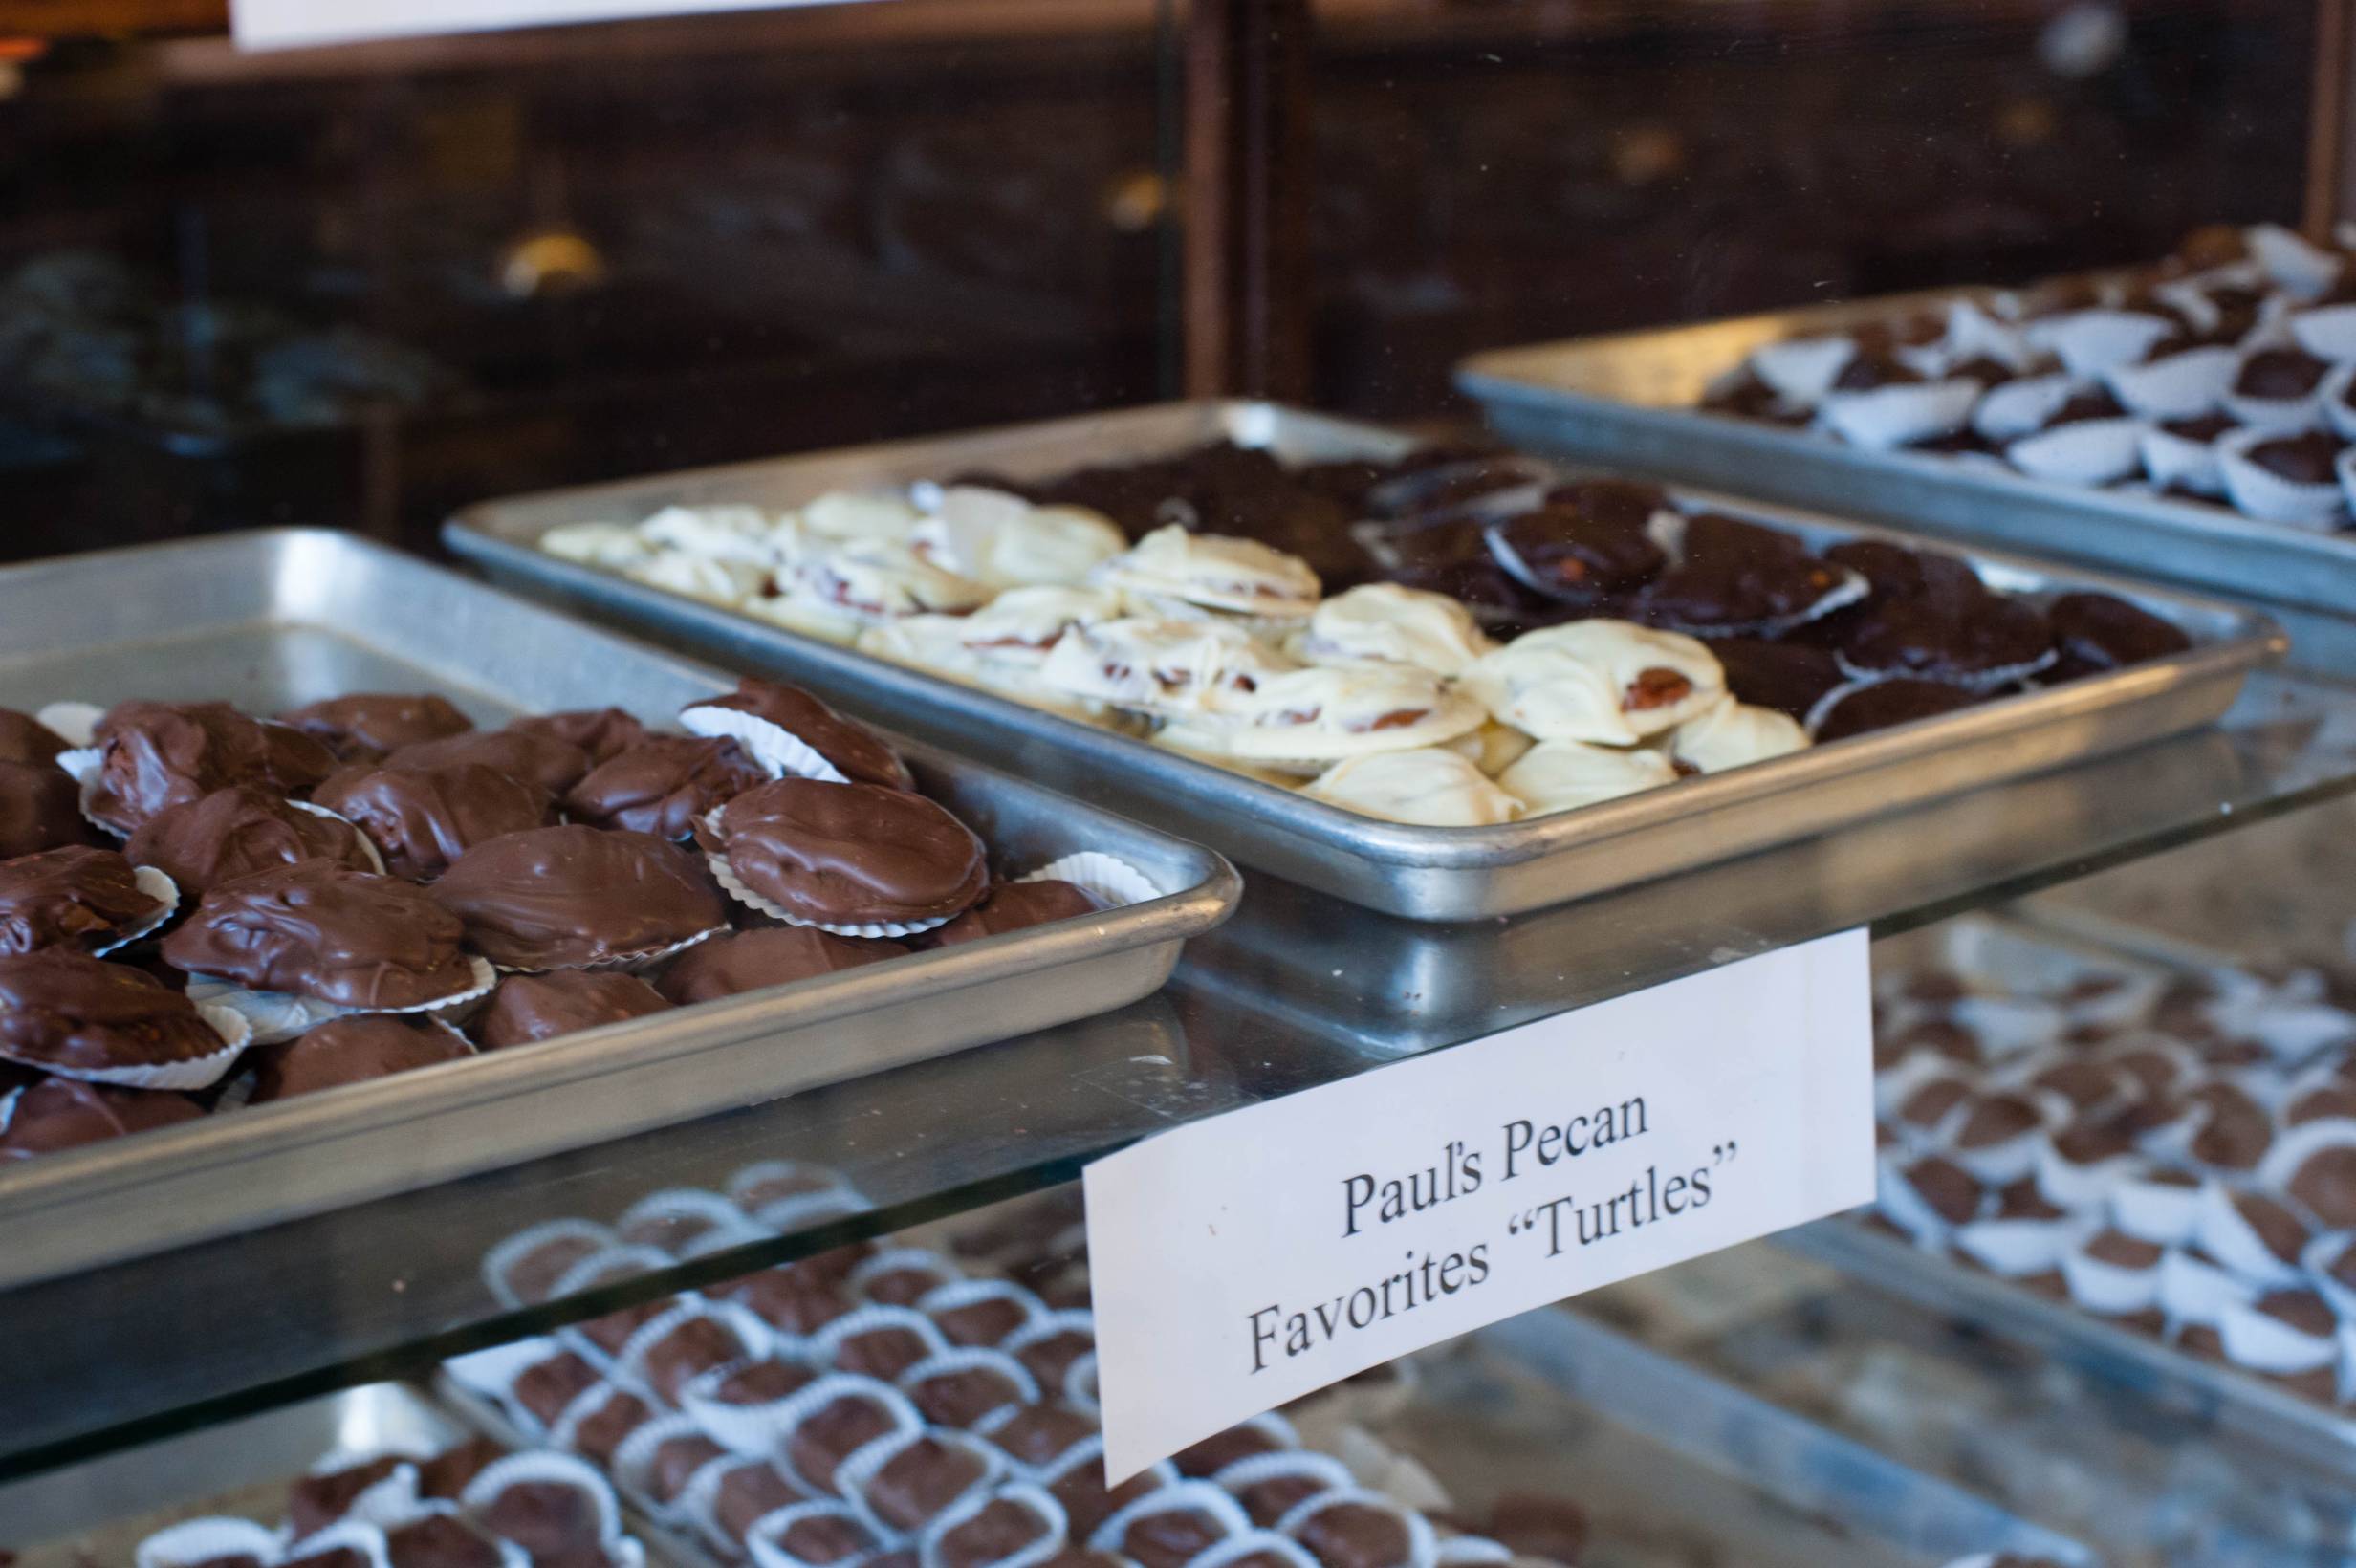 Hard candy ideas and soft chocolate sentiments at Flesor’s